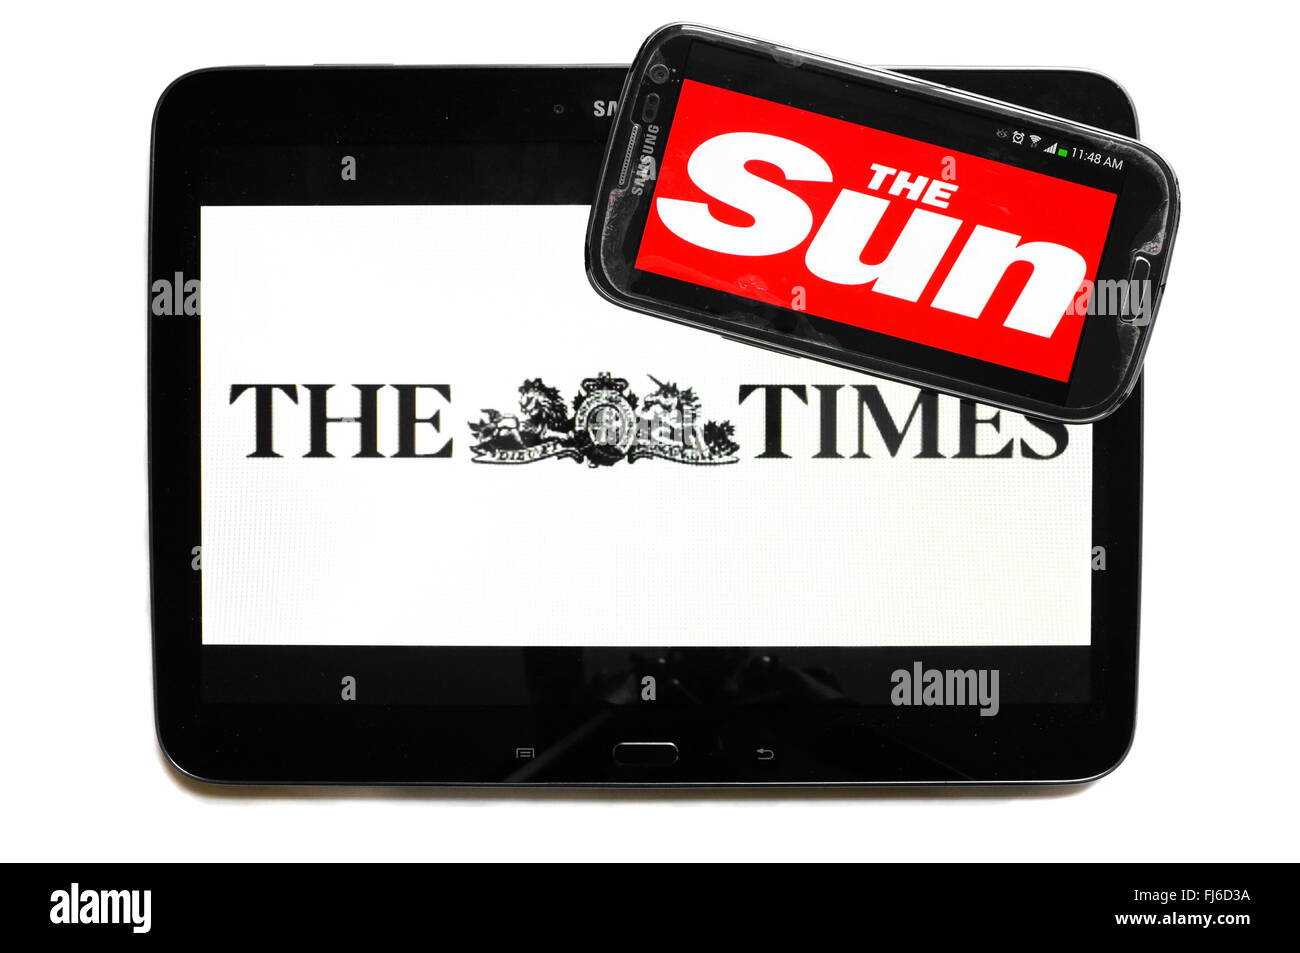 The logos of The Times and The Sun newspapers displayed on the screens of a tablet and a smartphone. Stock Photo